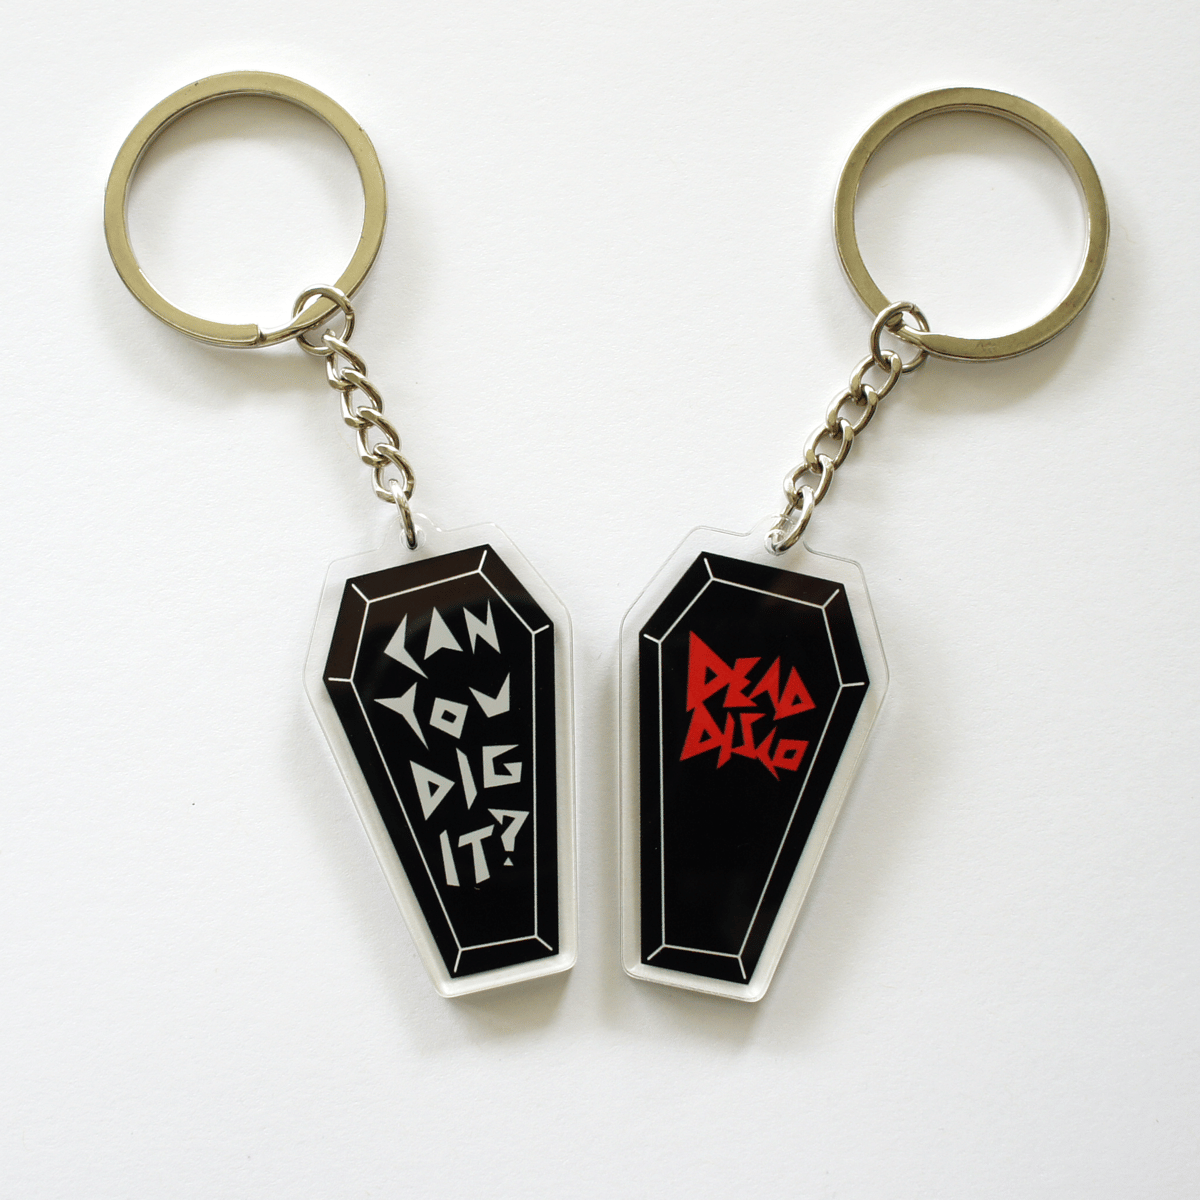 Can You Dig It? Acrylic Keychain